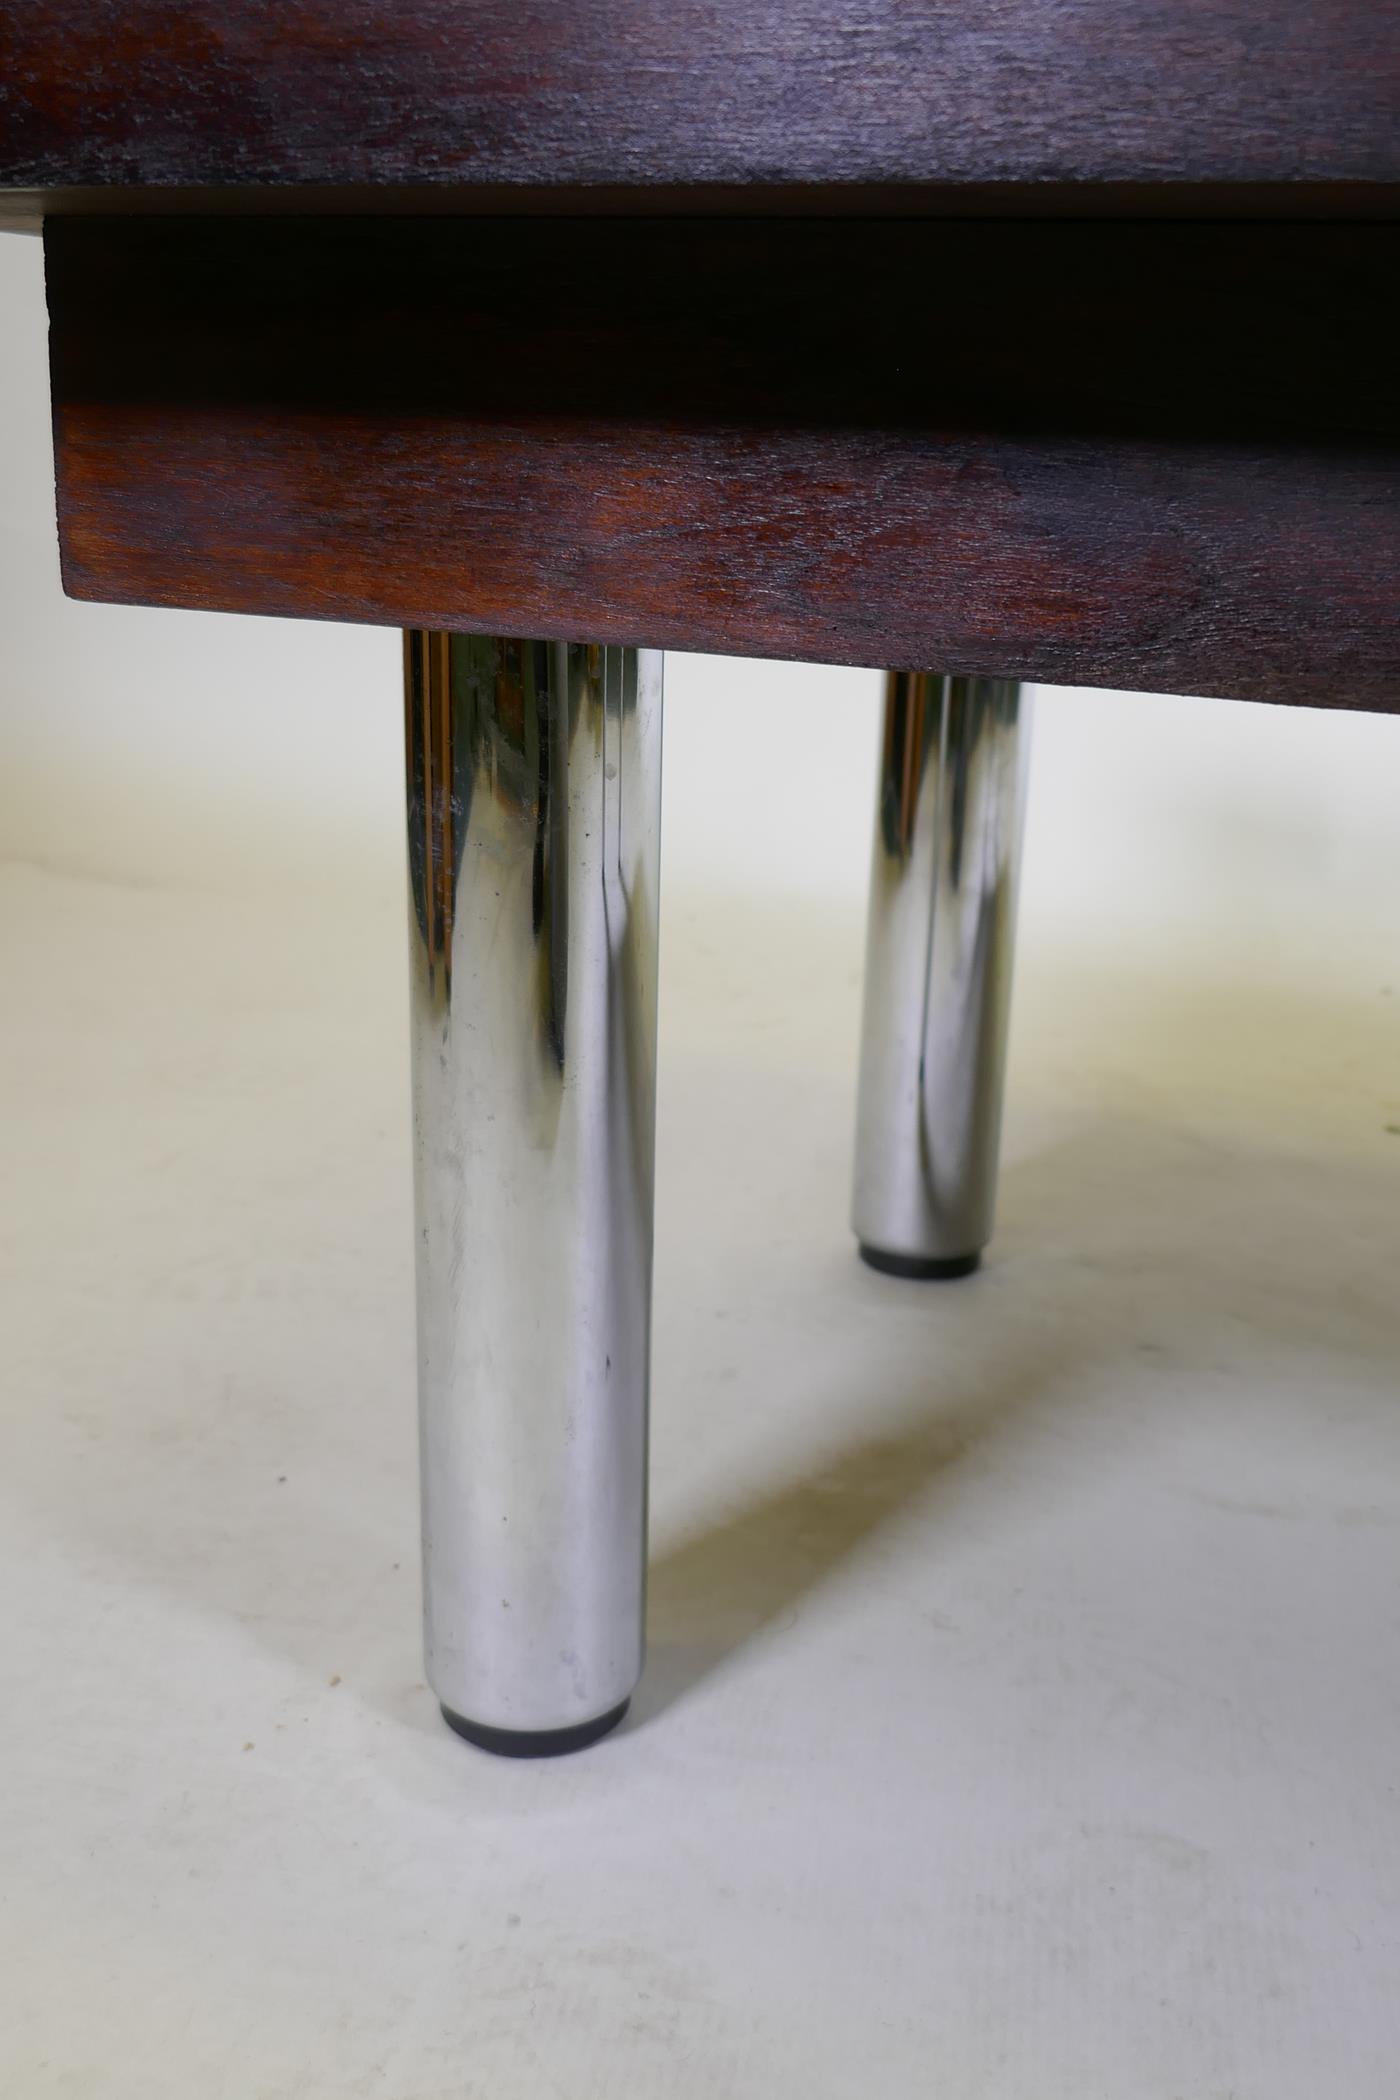 A contemporary hardwood coffee table with Italian designer chrome supports by Camar, 137 x 61cm, - Image 3 of 4